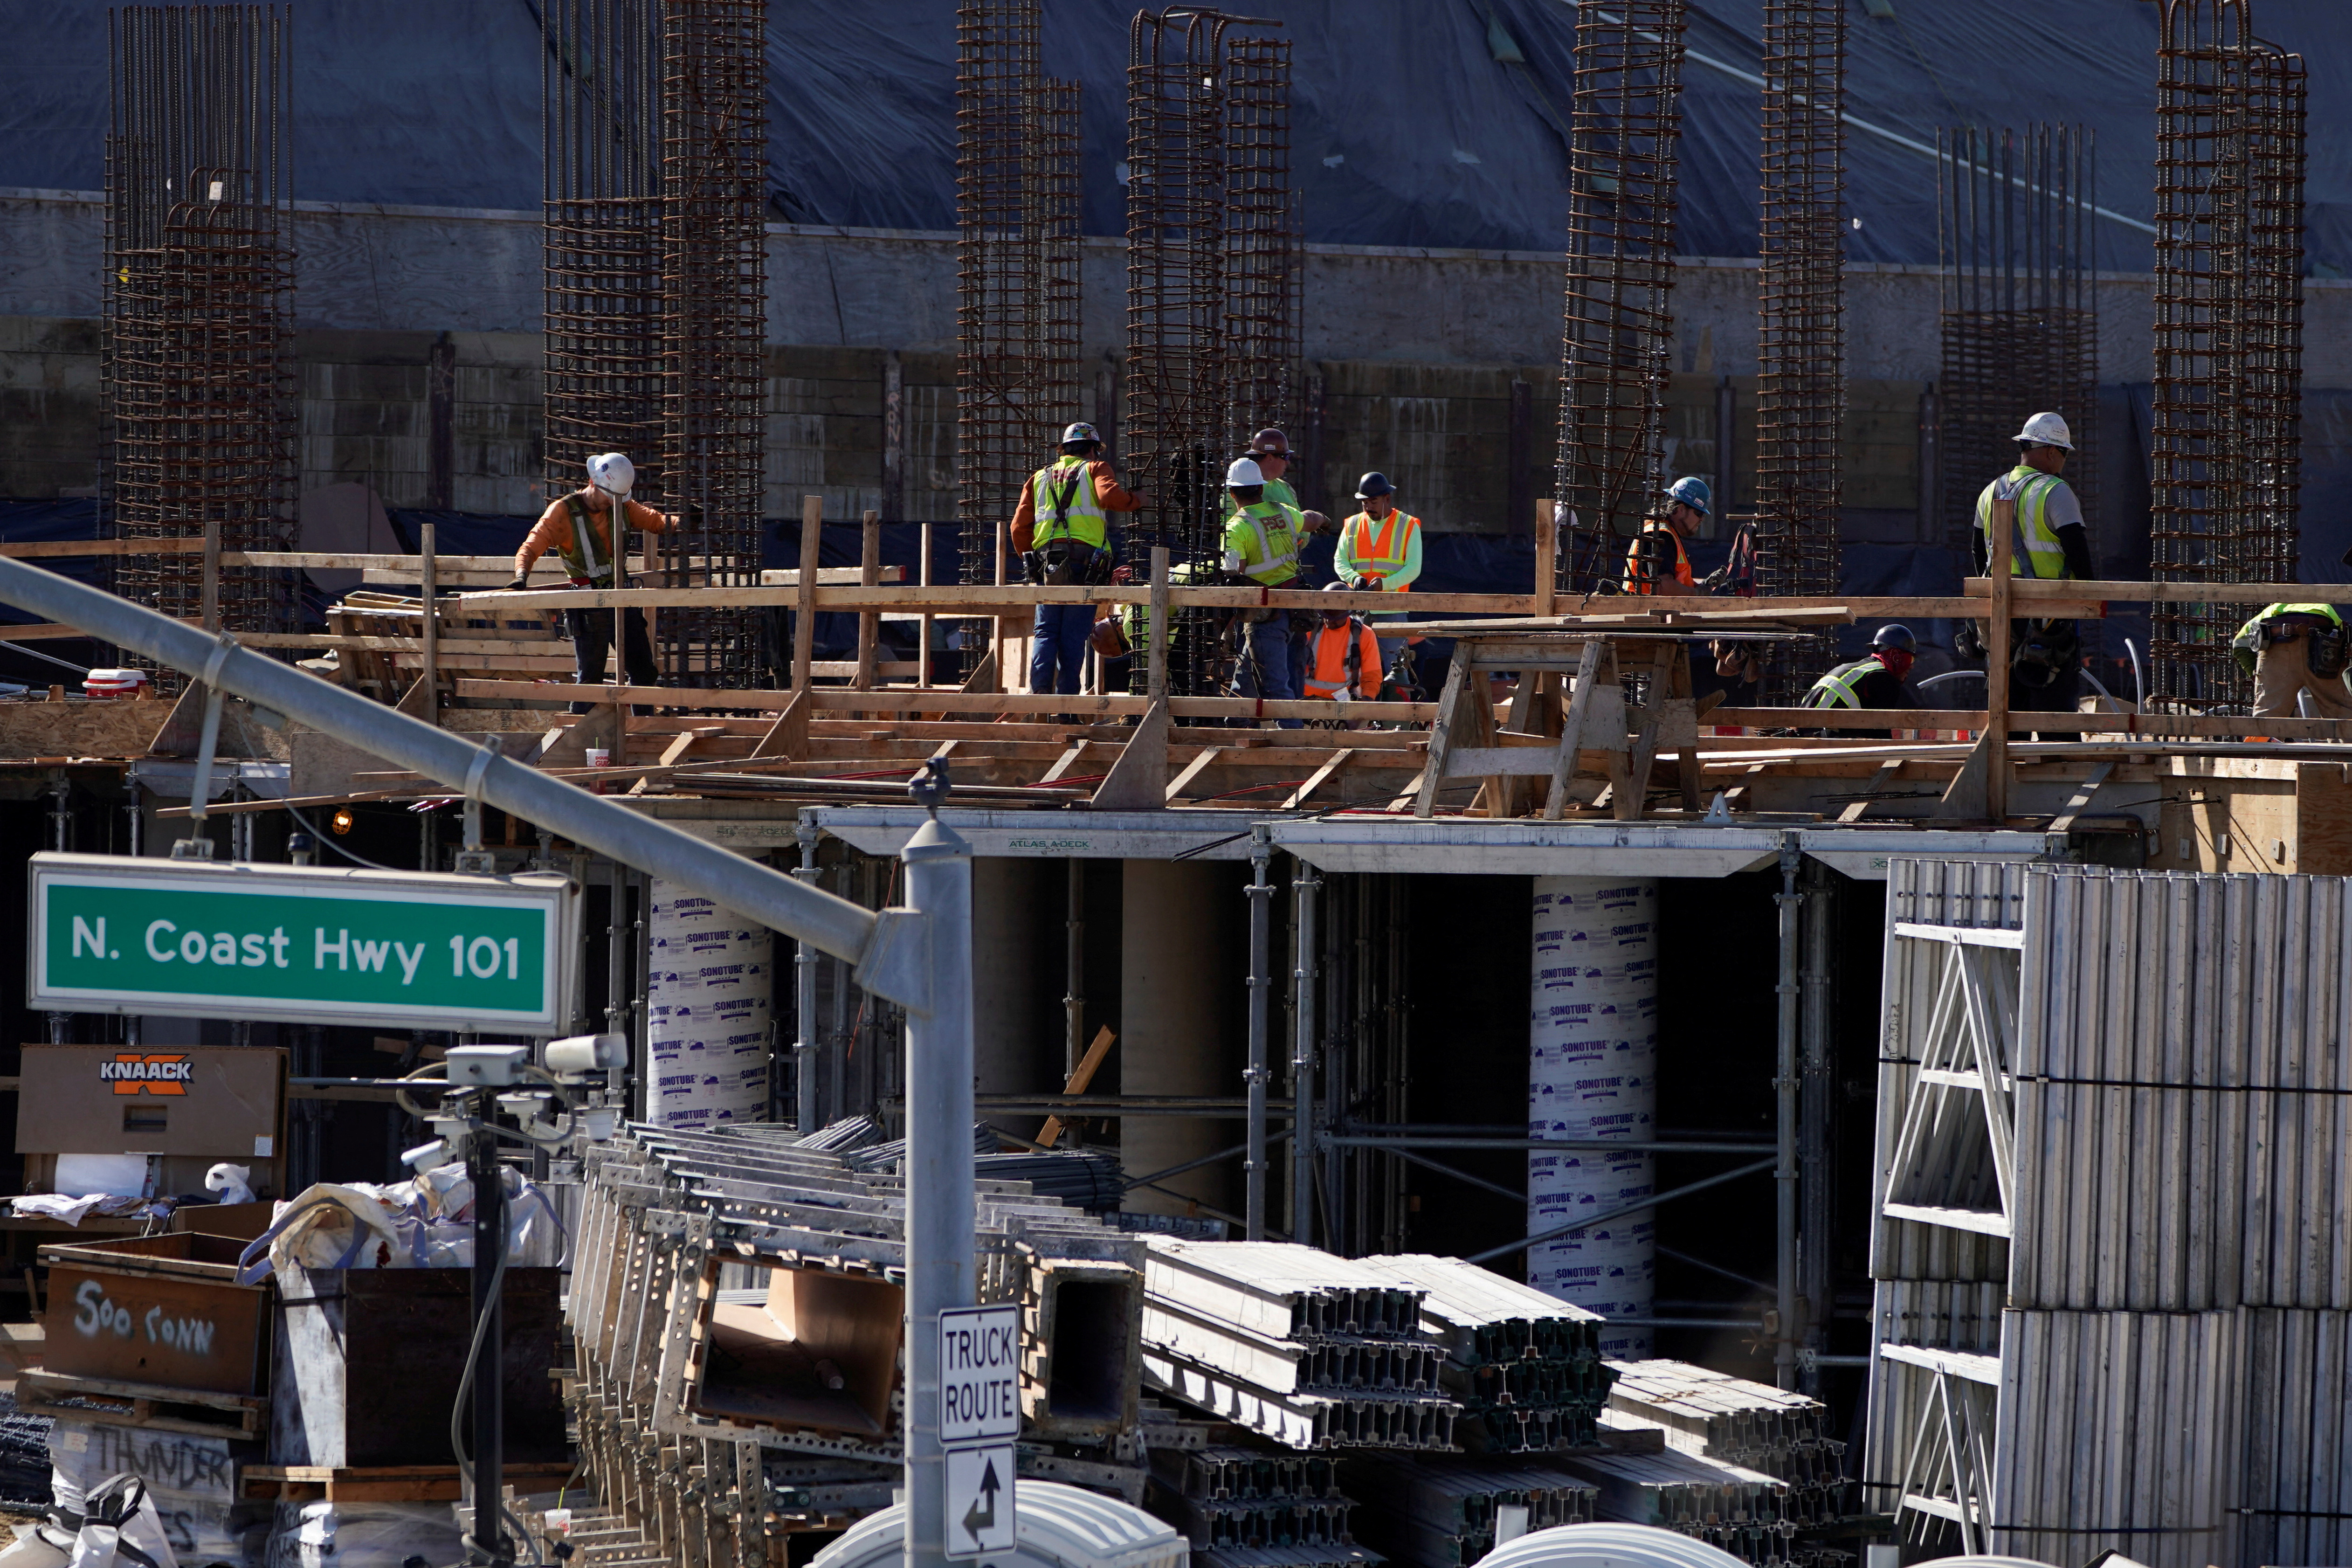 Work crews construct a new hotel complex on oceanfront property in Encinitas, California